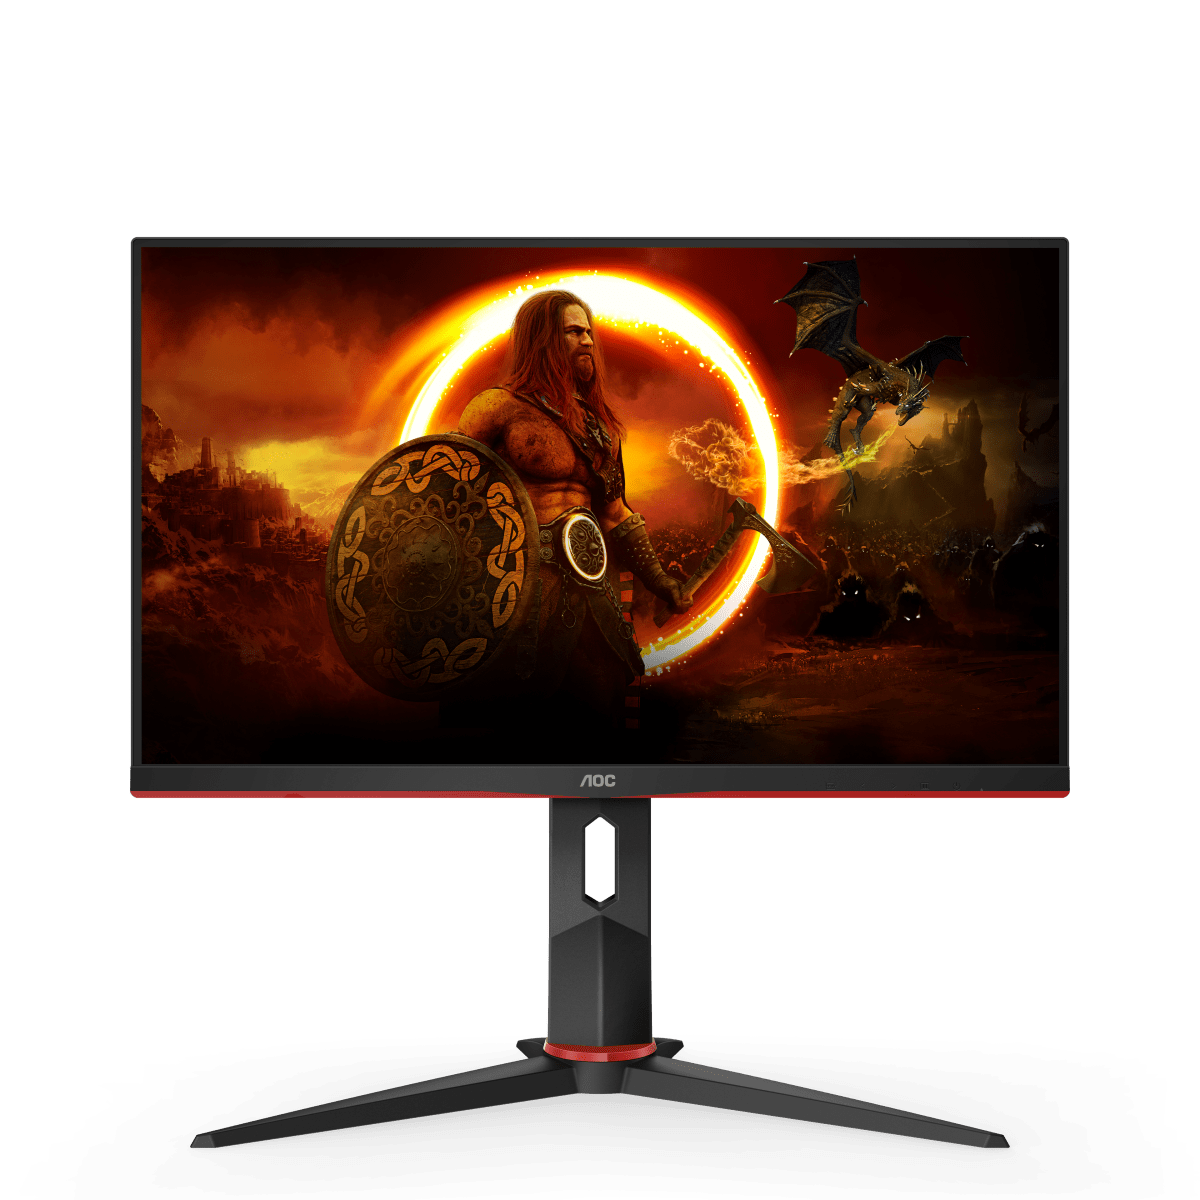 AGON by AOC: presented new monitors now at 165 Hz